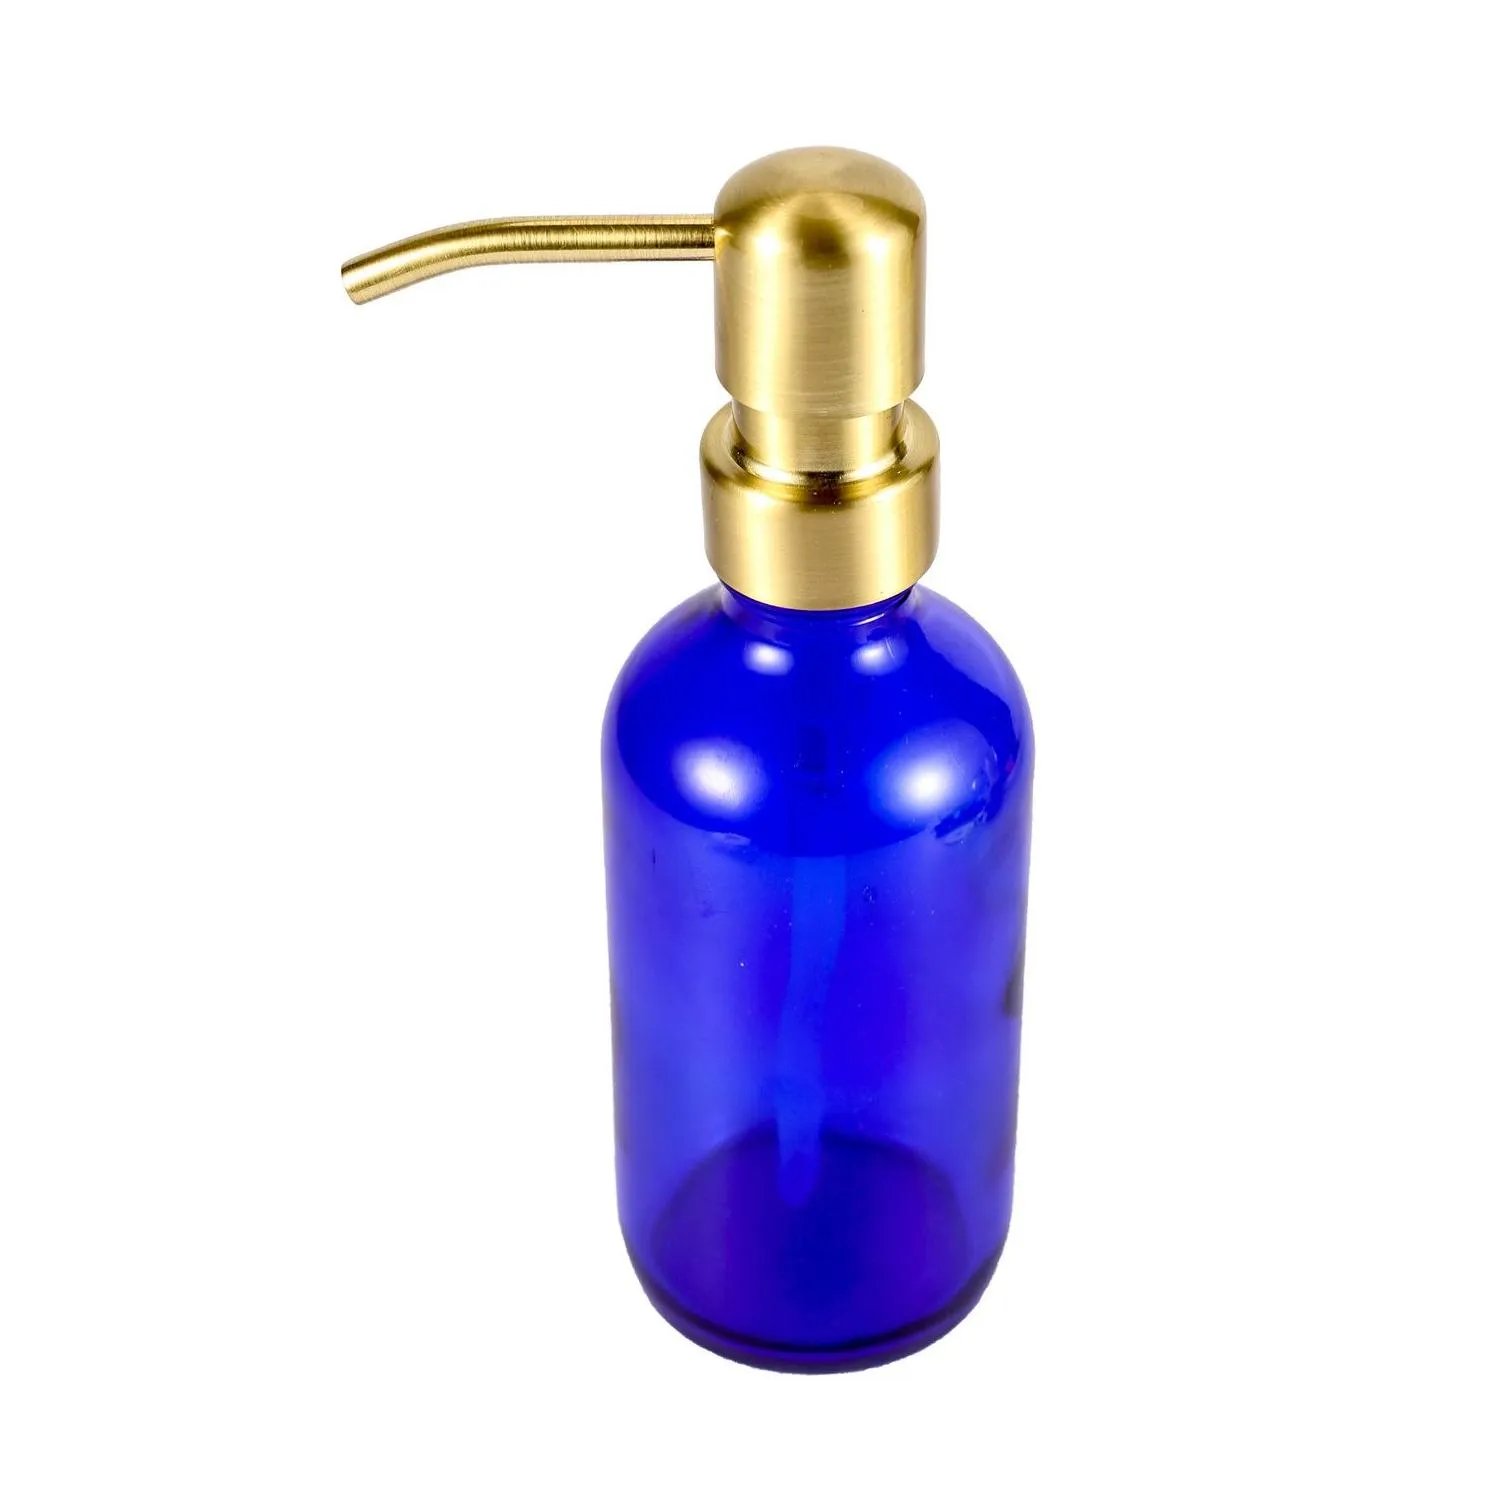 28/400 wholesale Soap Dispenser Gold Brass Rust Proof 304 Stainless Steel Liquid Pump Only for Kitchen Bathroom Jar not included